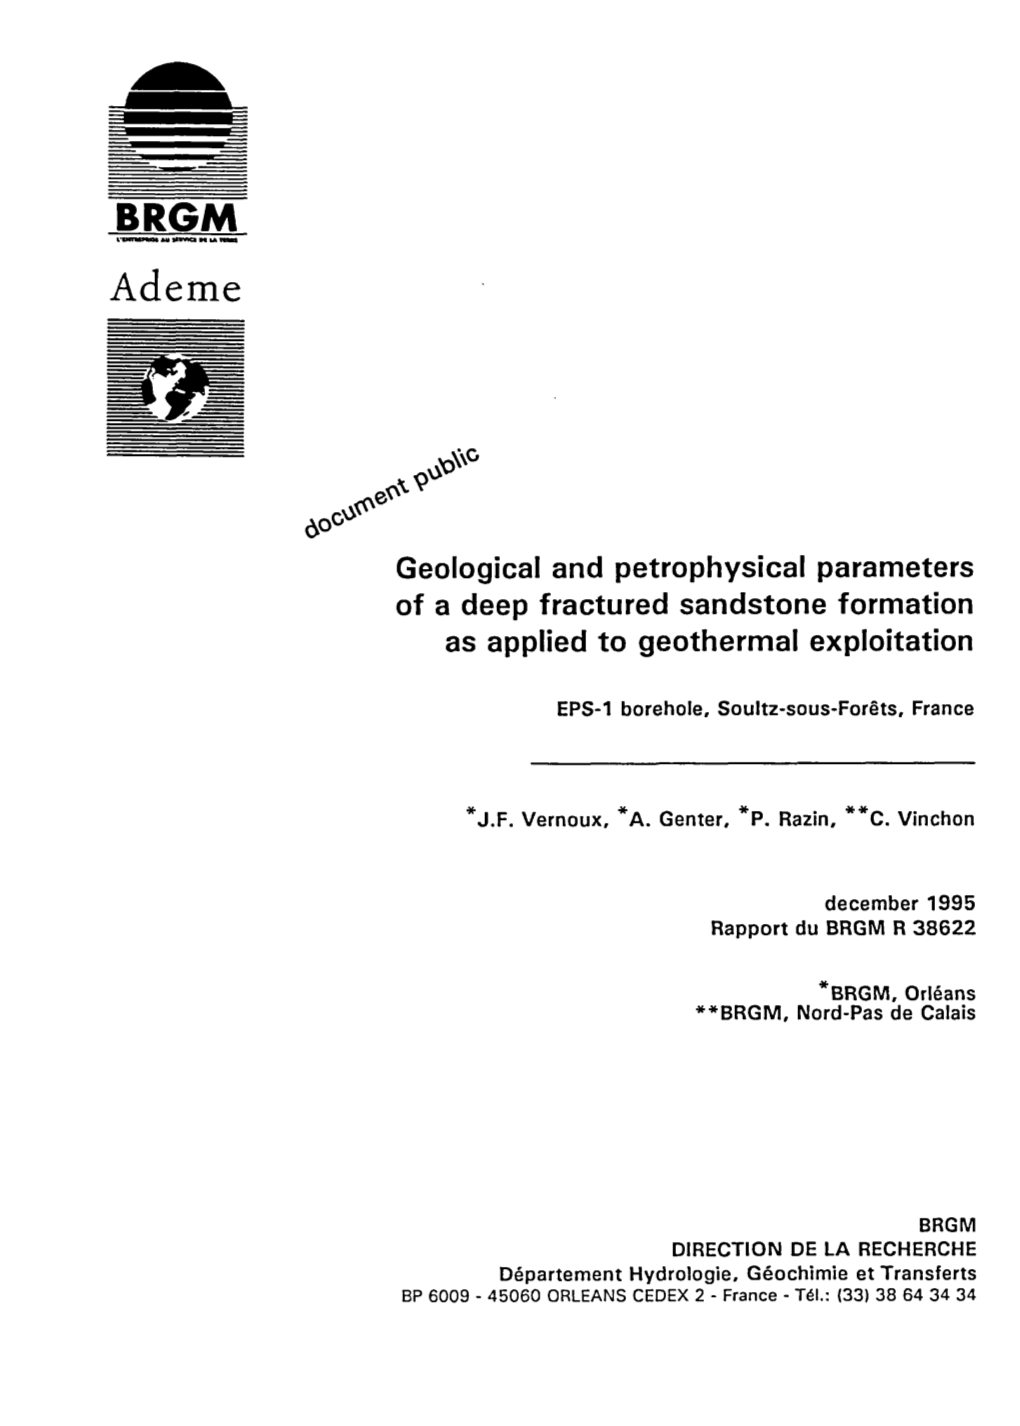 60° Geological and Petrophysical Parameters of a Deep Fractured Sandstone Formation As Applied to Geothermal Exploitation